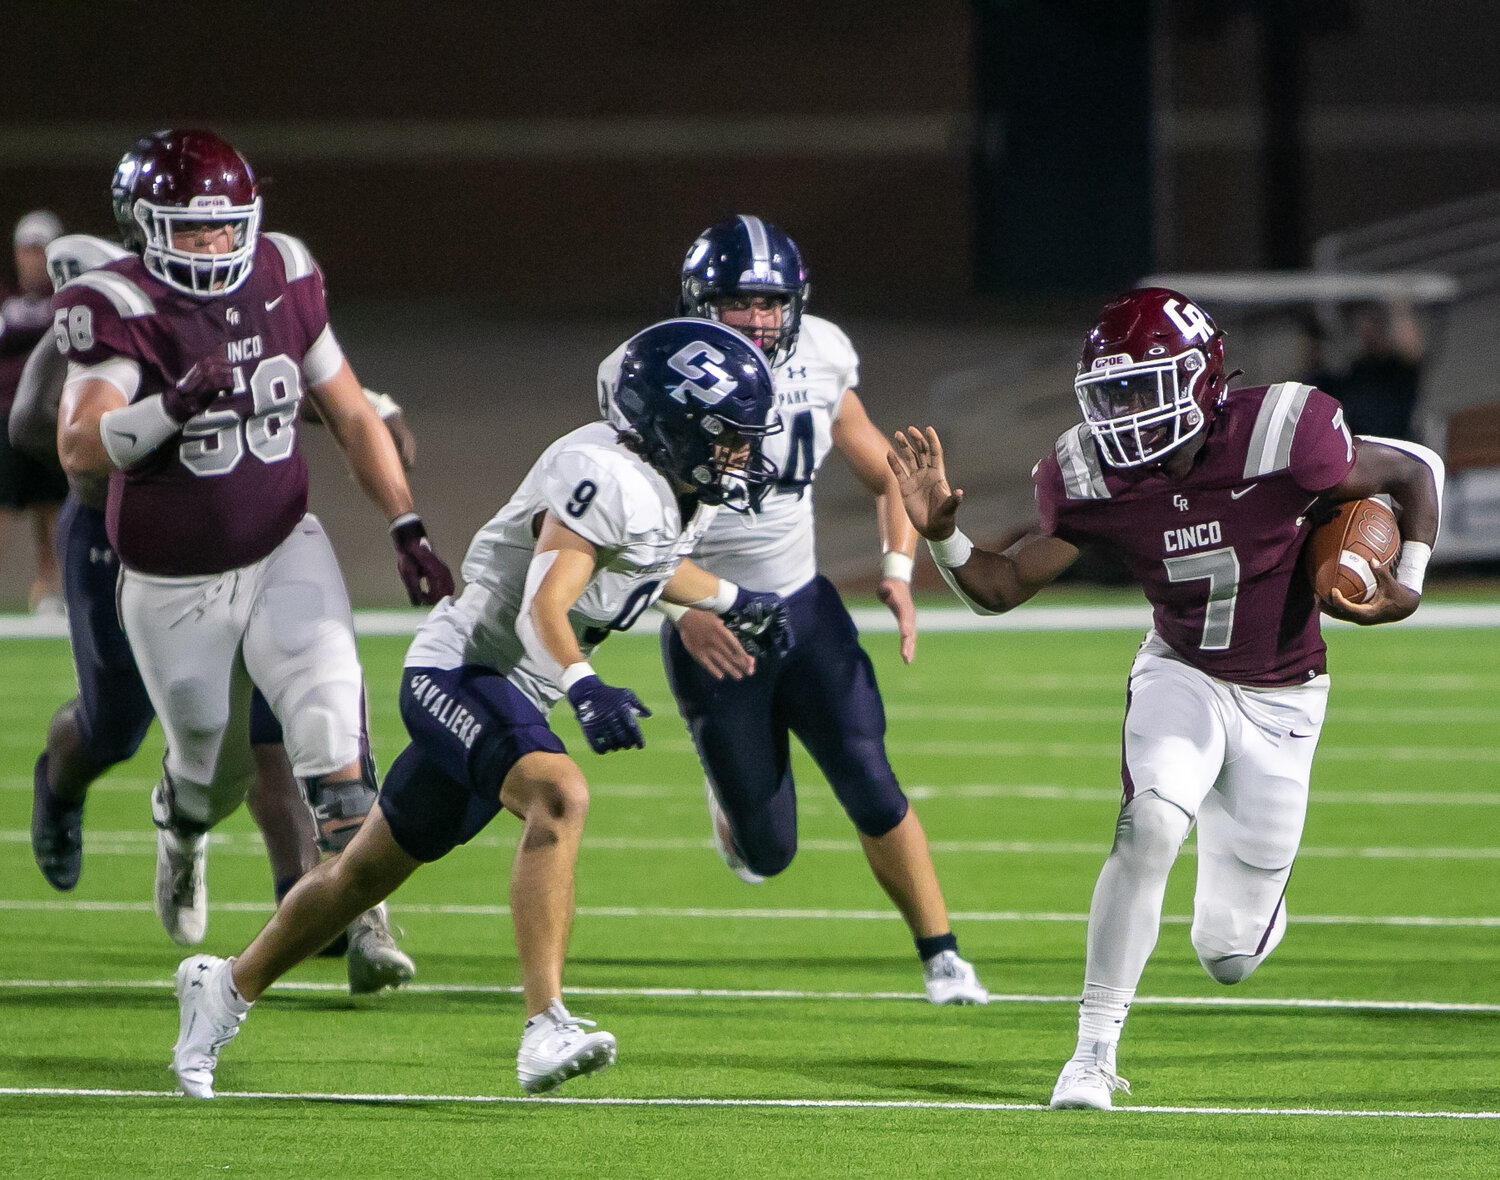 Marcus Gadlin stiff arms a College Park player during Friday's game between Cinco Ranch and College Park at Rhodes Stadium.